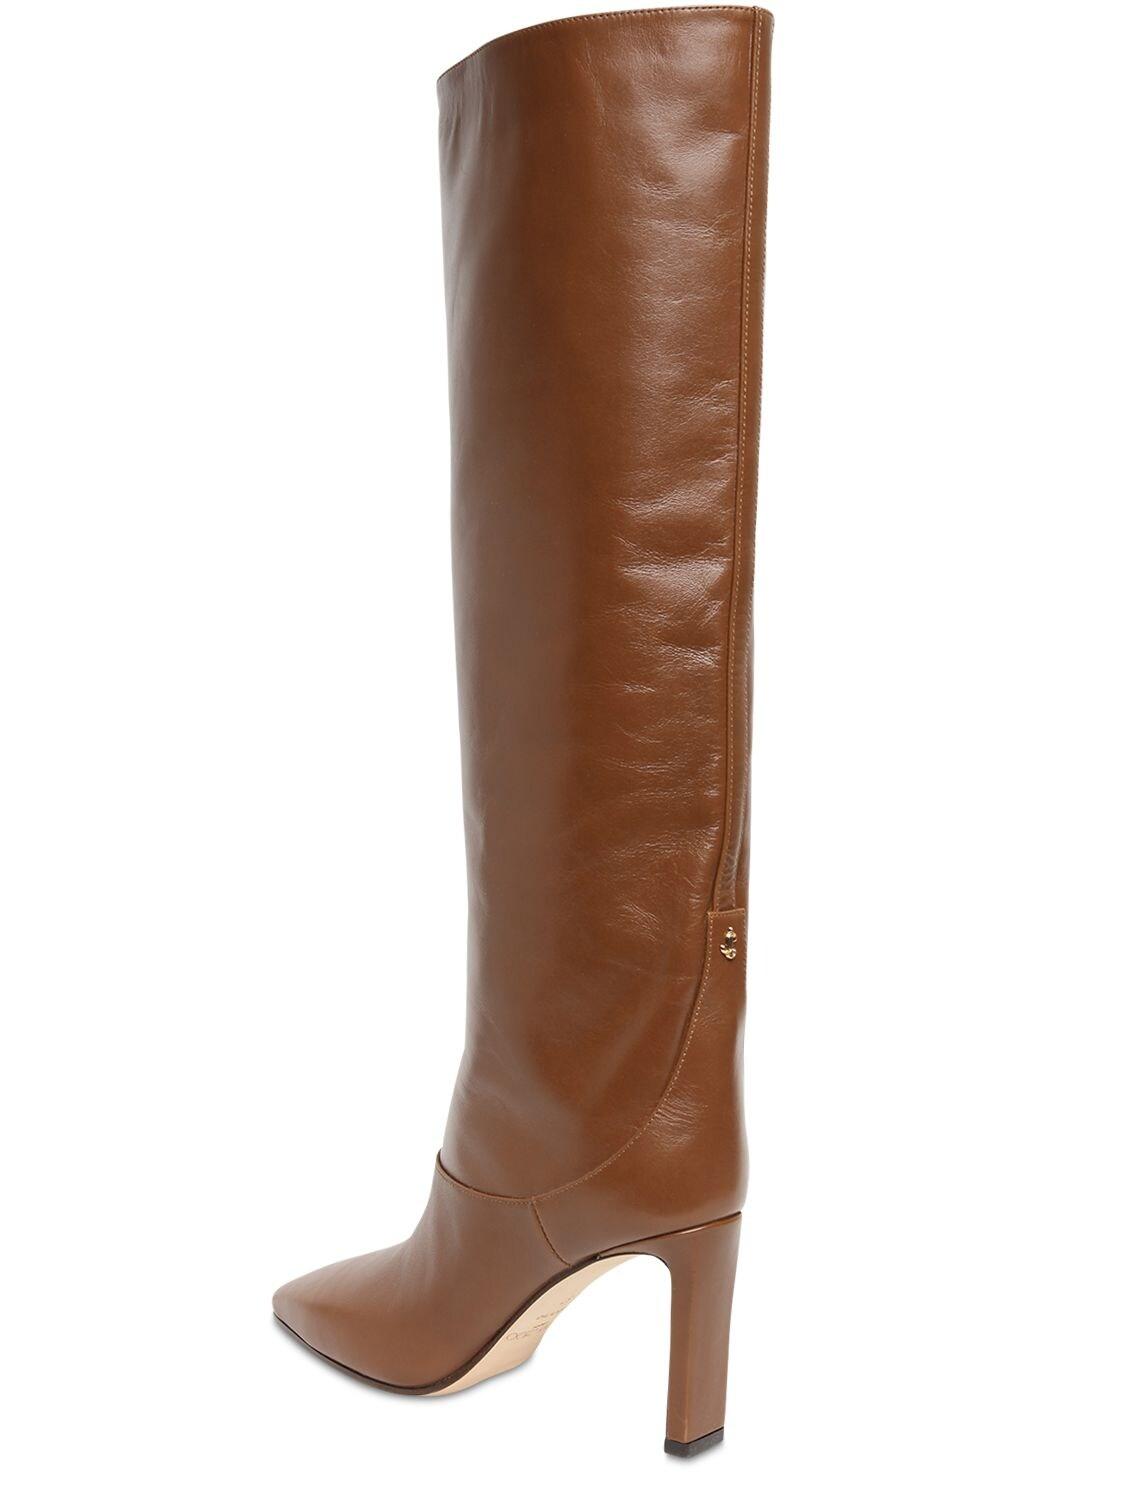 Jimmy Choo 85mm Mahesa Leather Tall Boots in Brown - Lyst